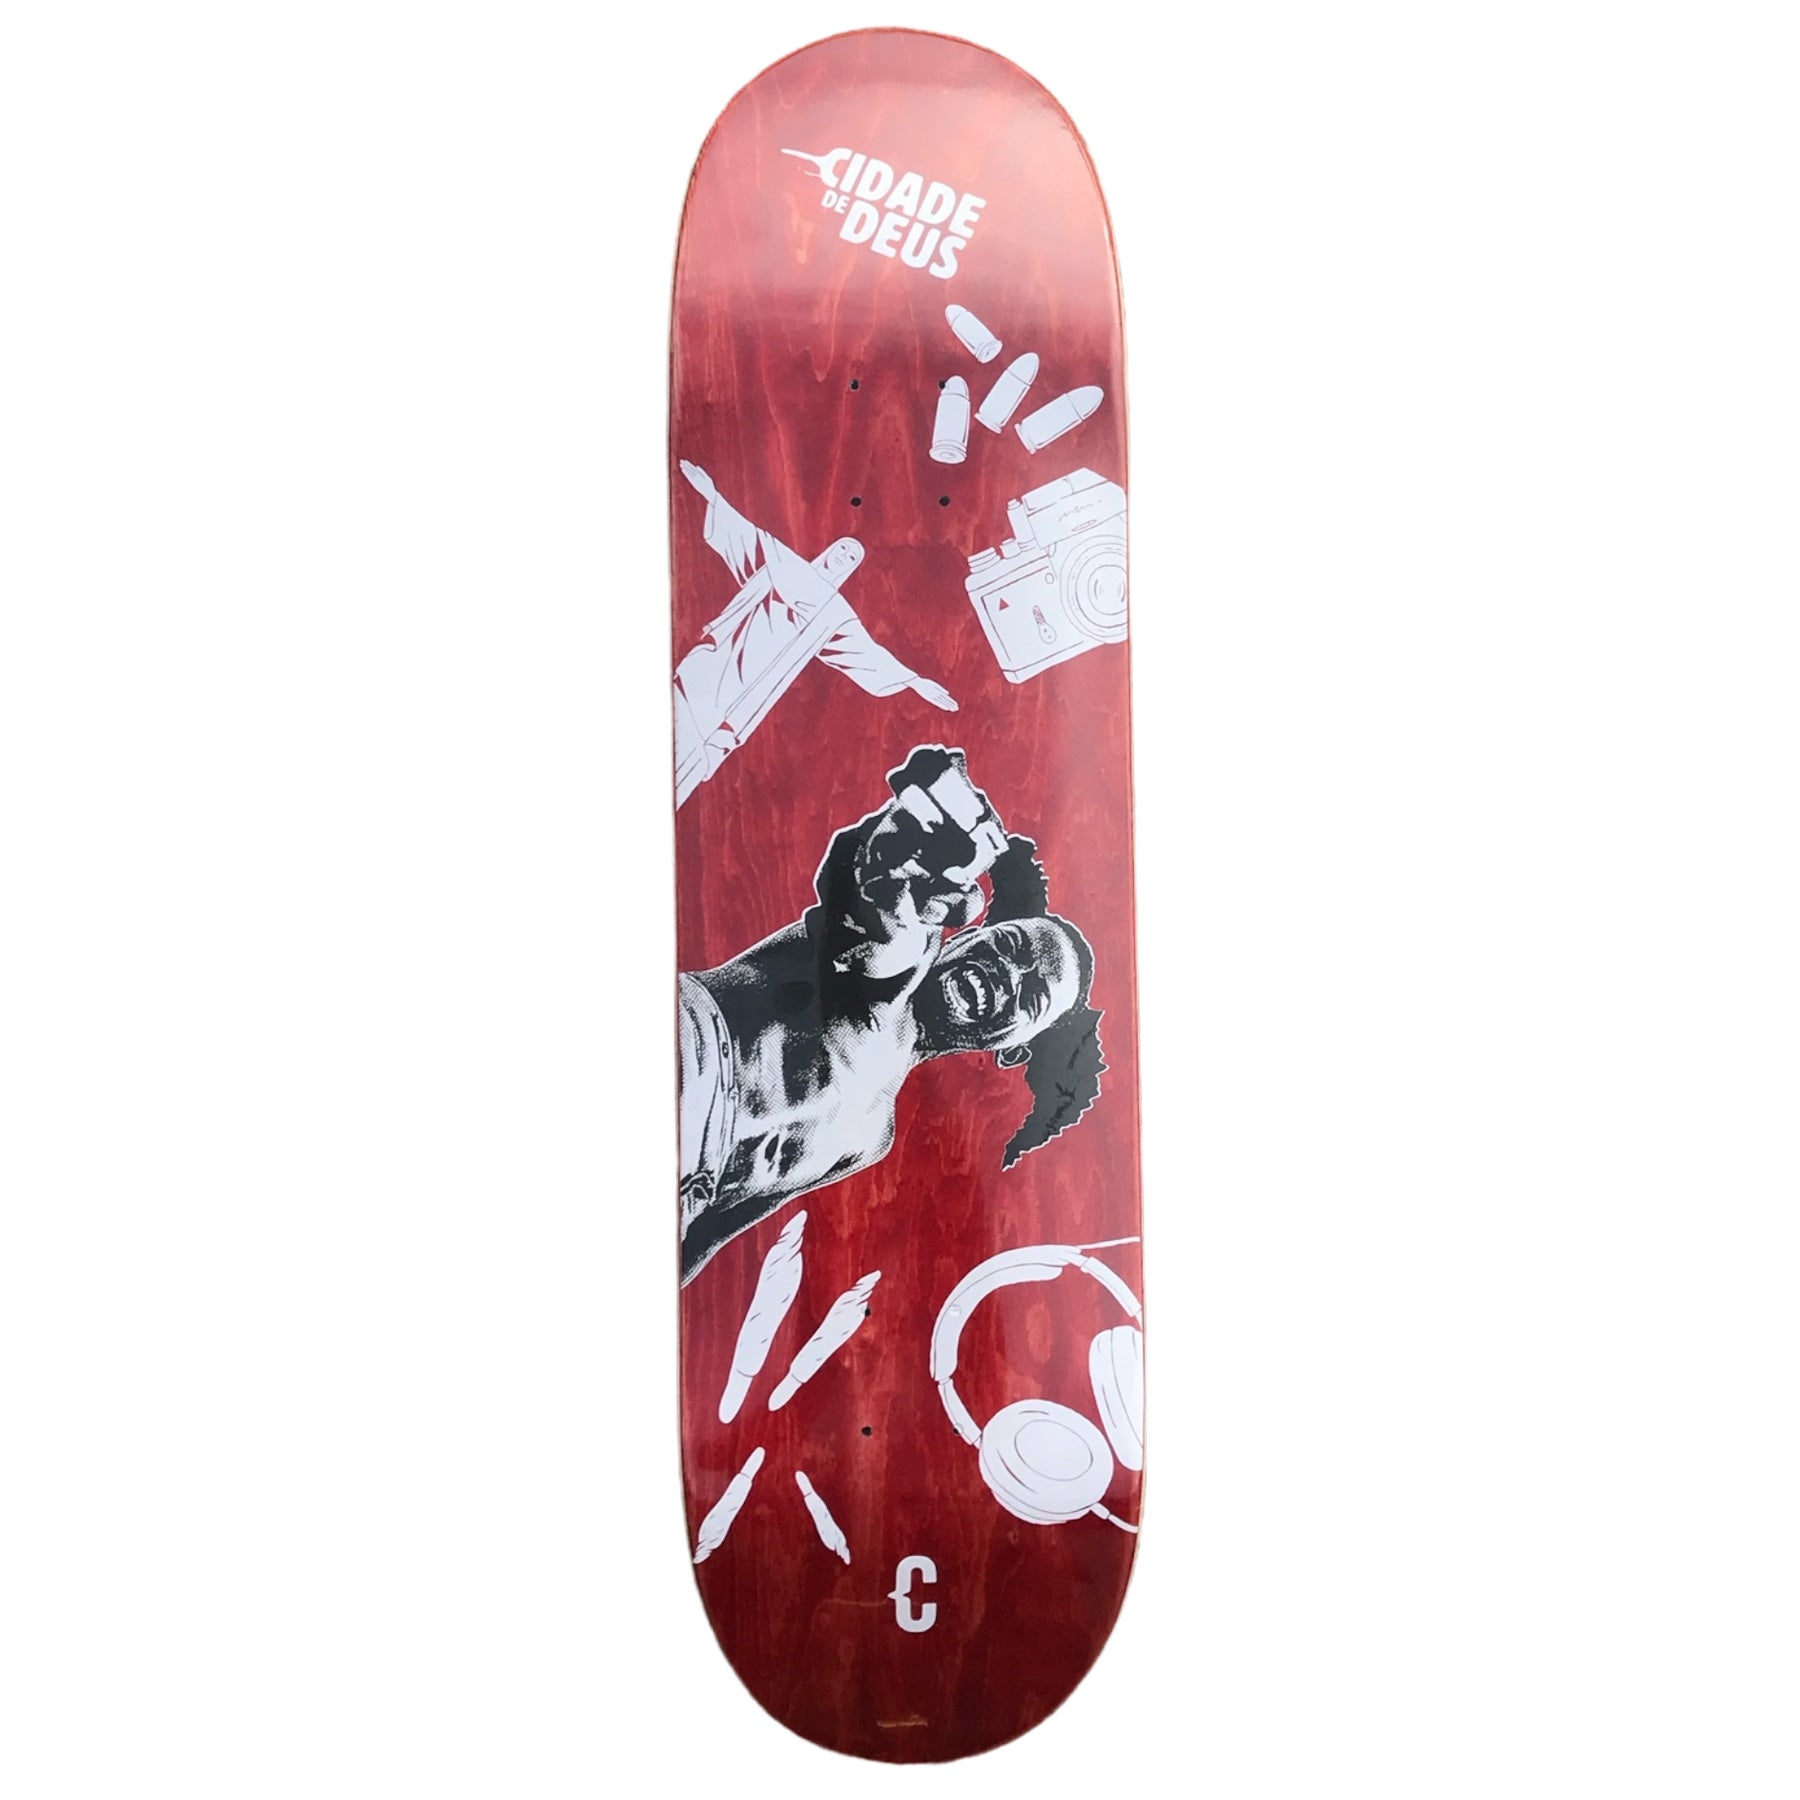 Clown skateboards allcity deck in red with a city of god film inspired graphic. Free uk shipping over £50